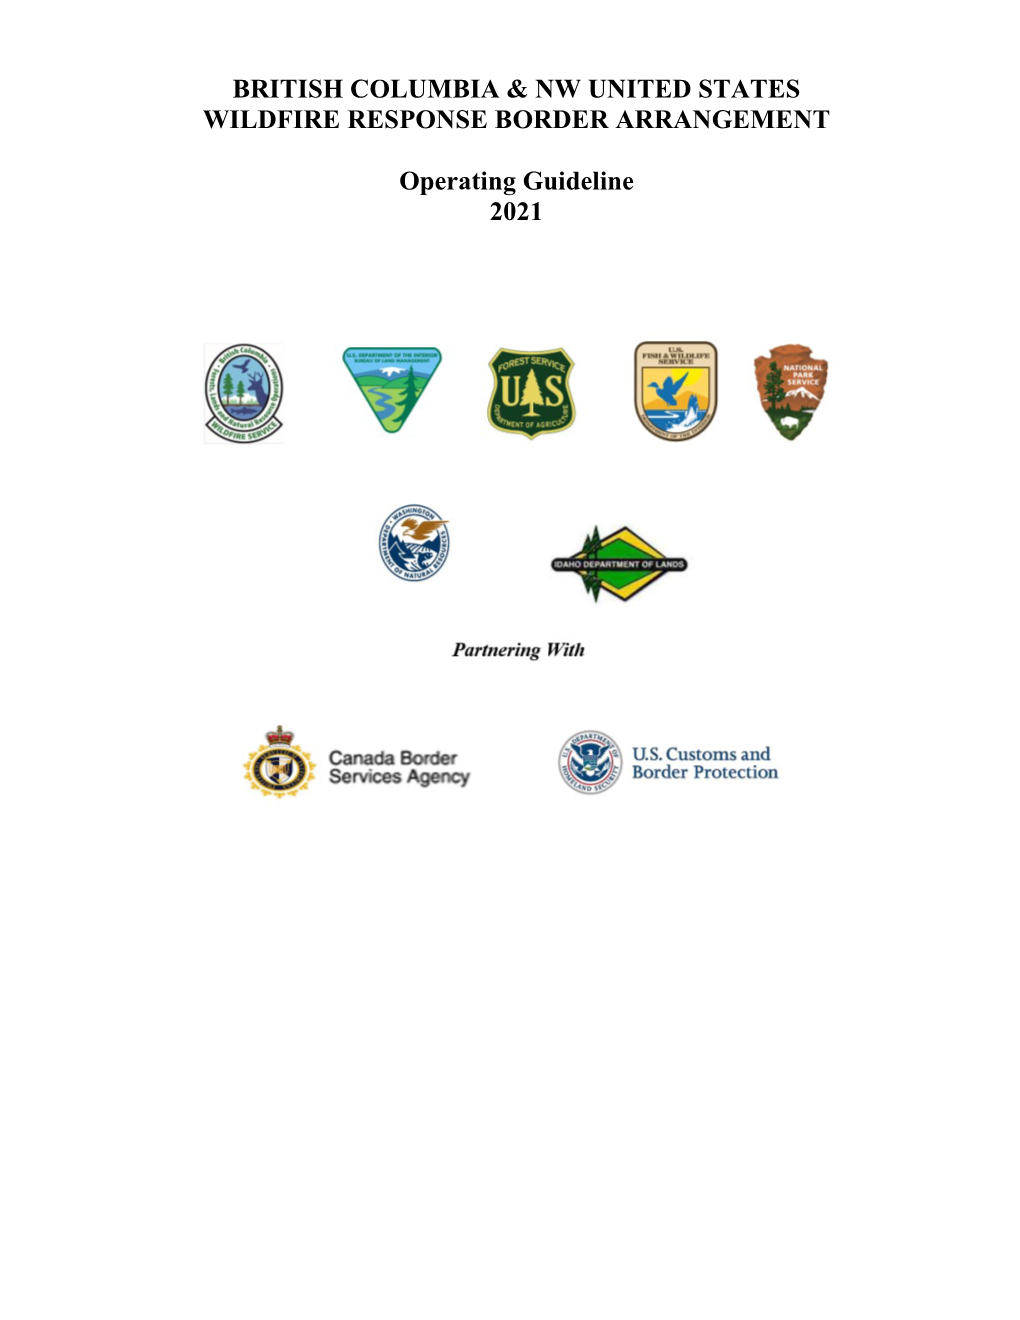 BC and U.S.A. Wildfire Response Border Arrangement Operating